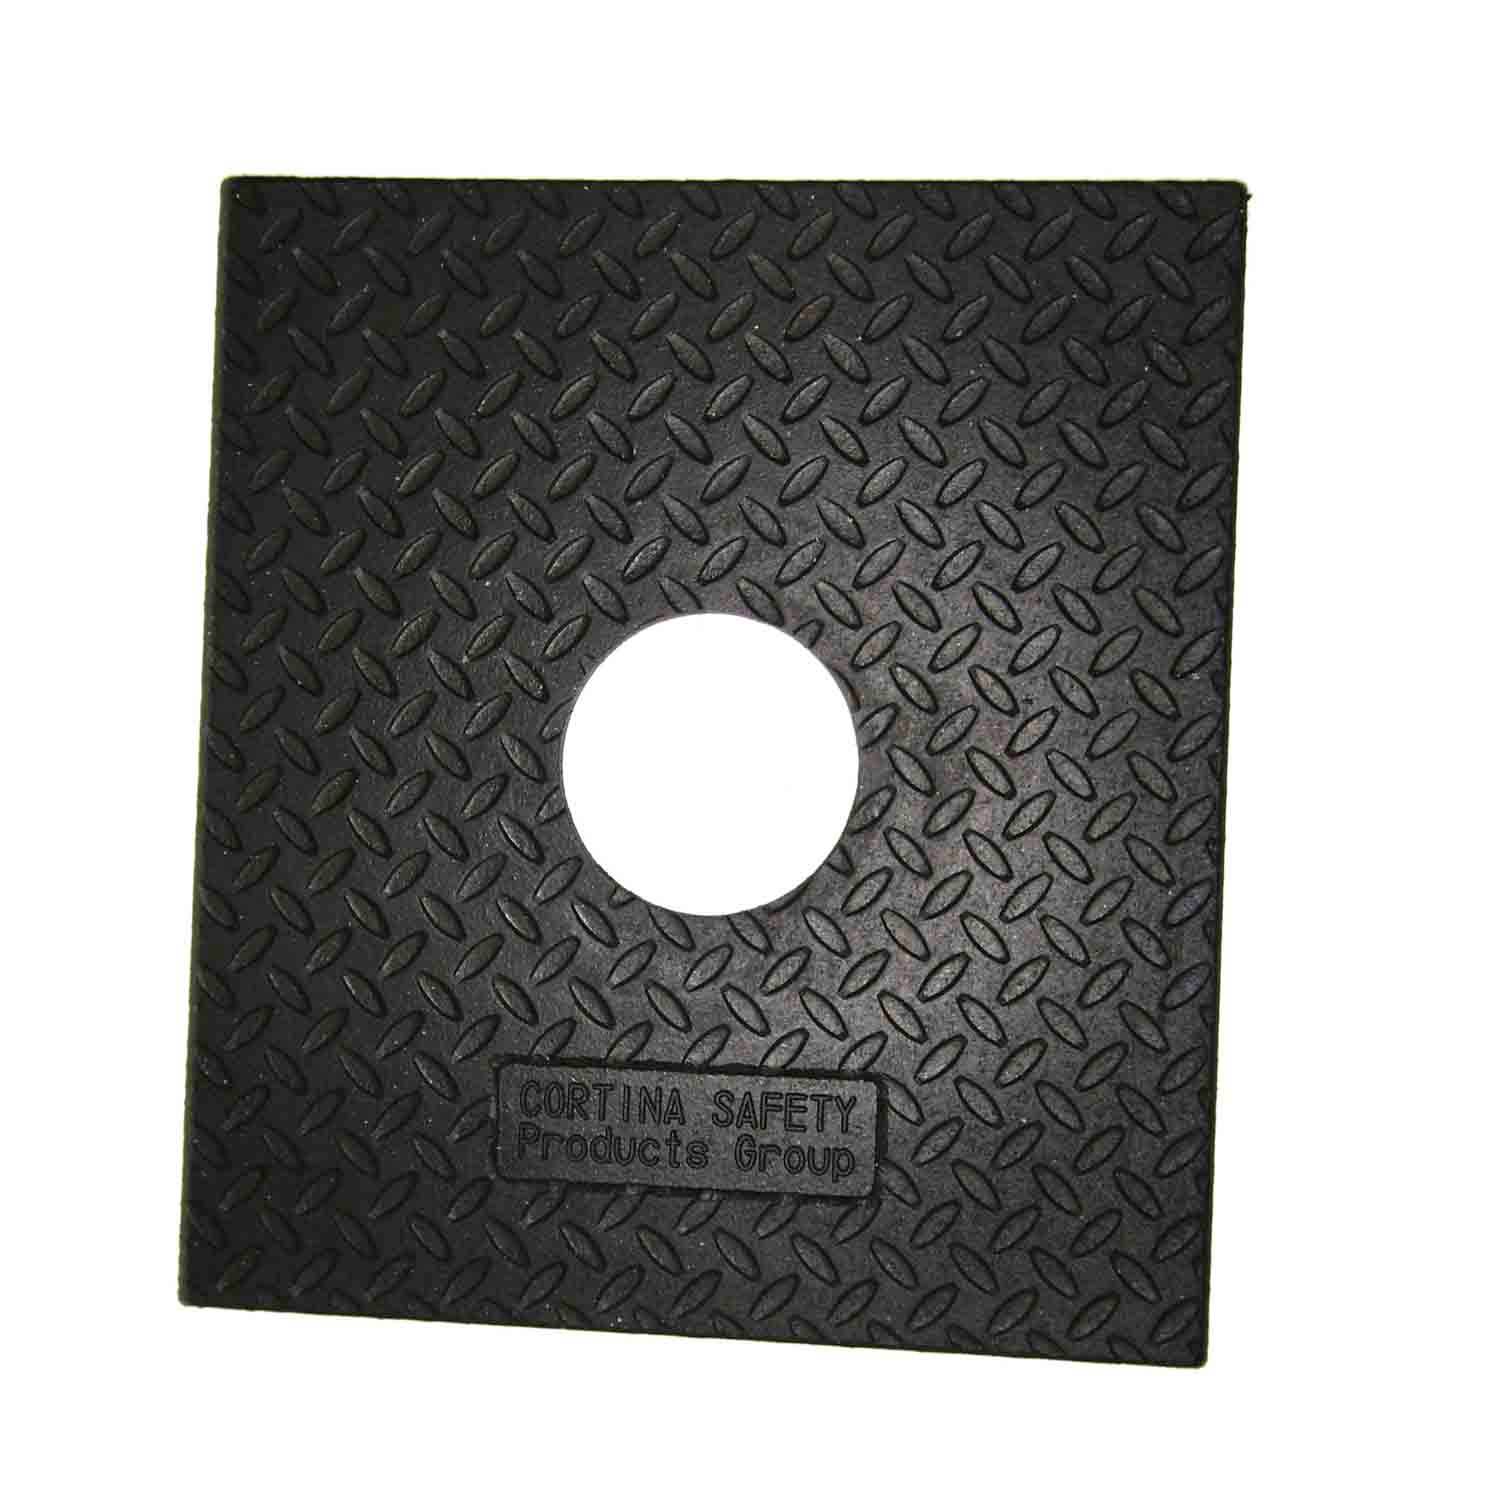 Cortina Safety Delineator Base (base only)